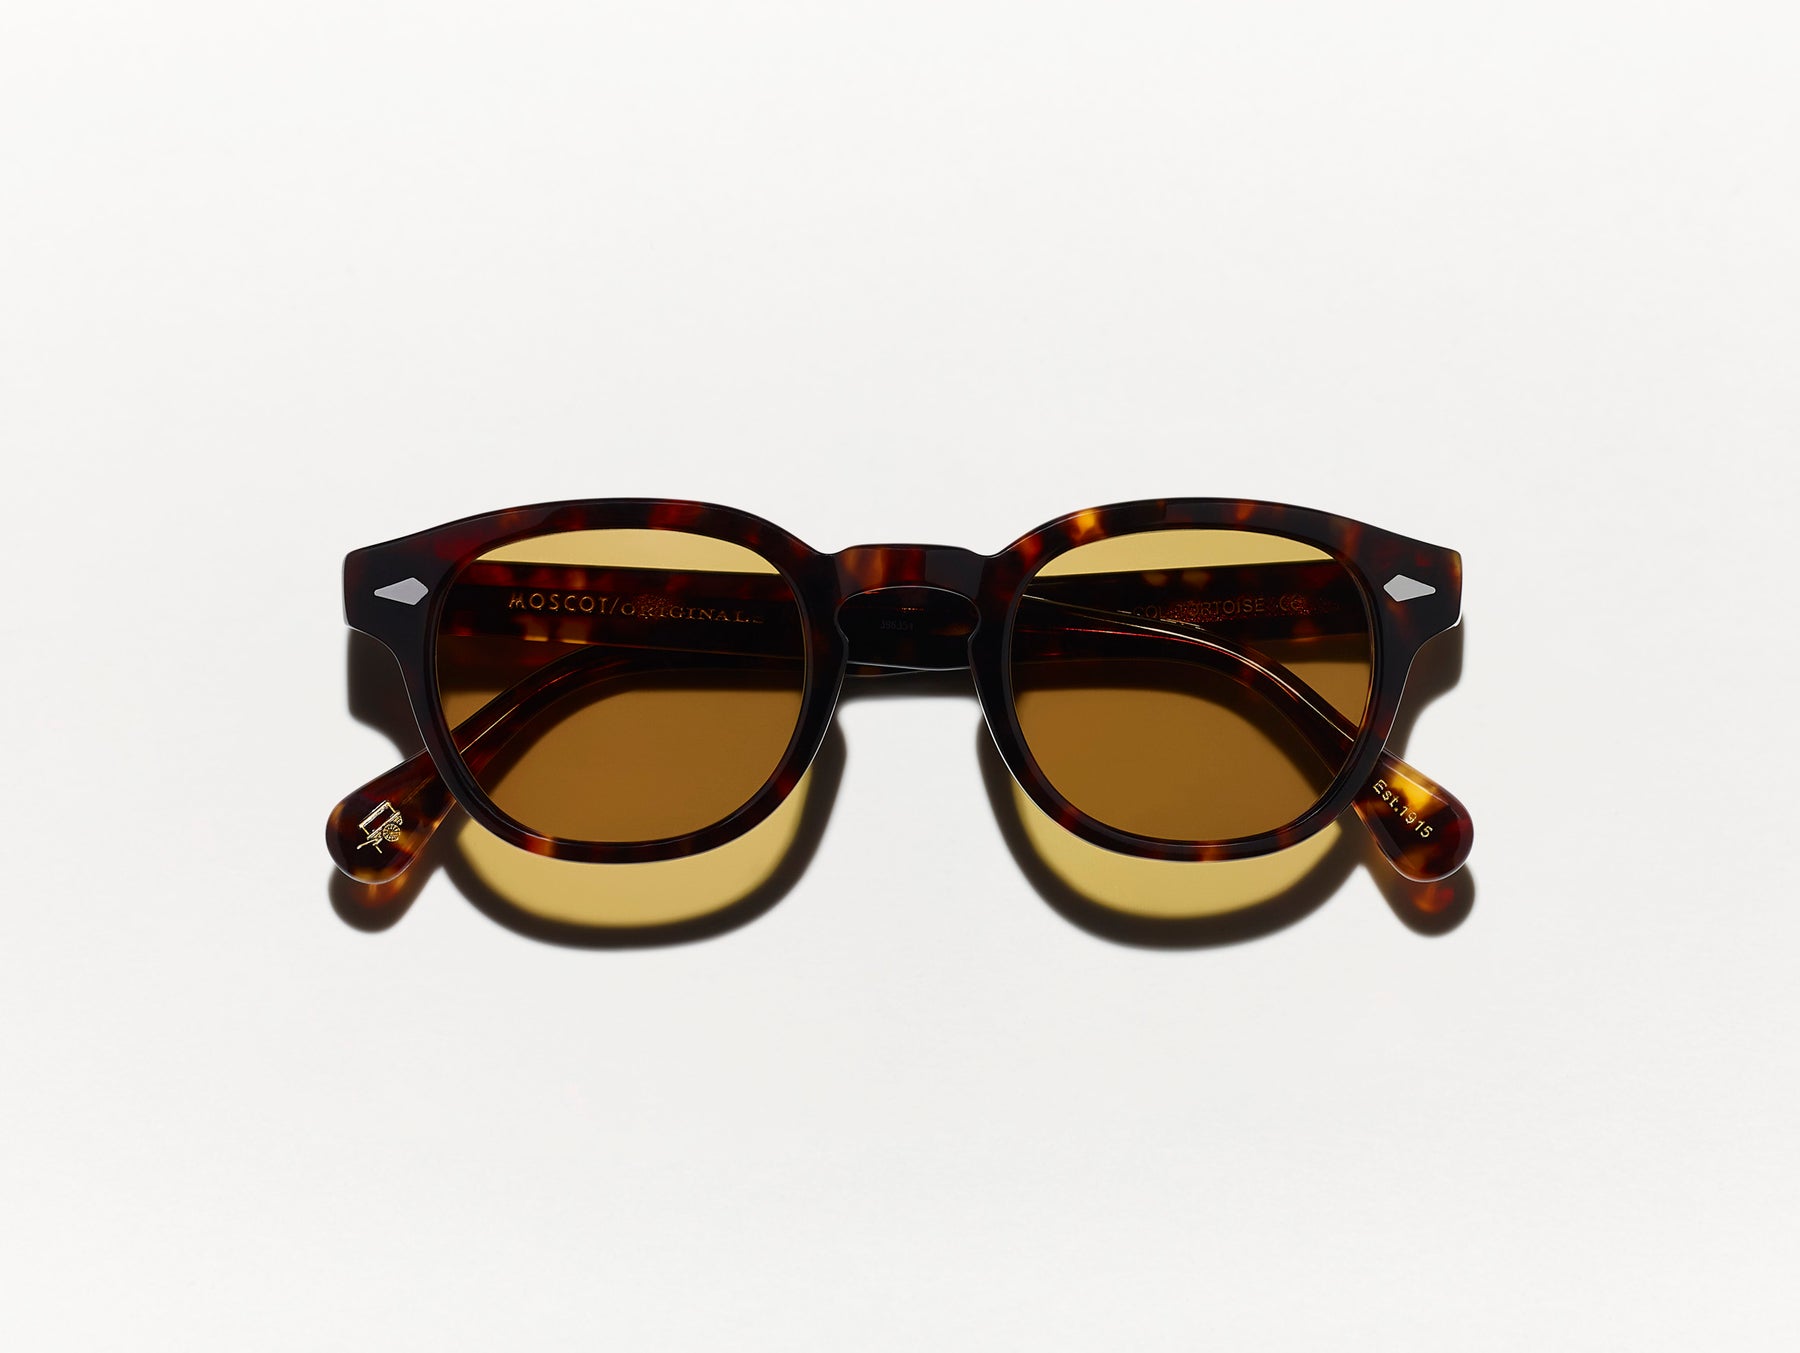 The LEMTOSH Tortoise with Amber Tinted Lenses